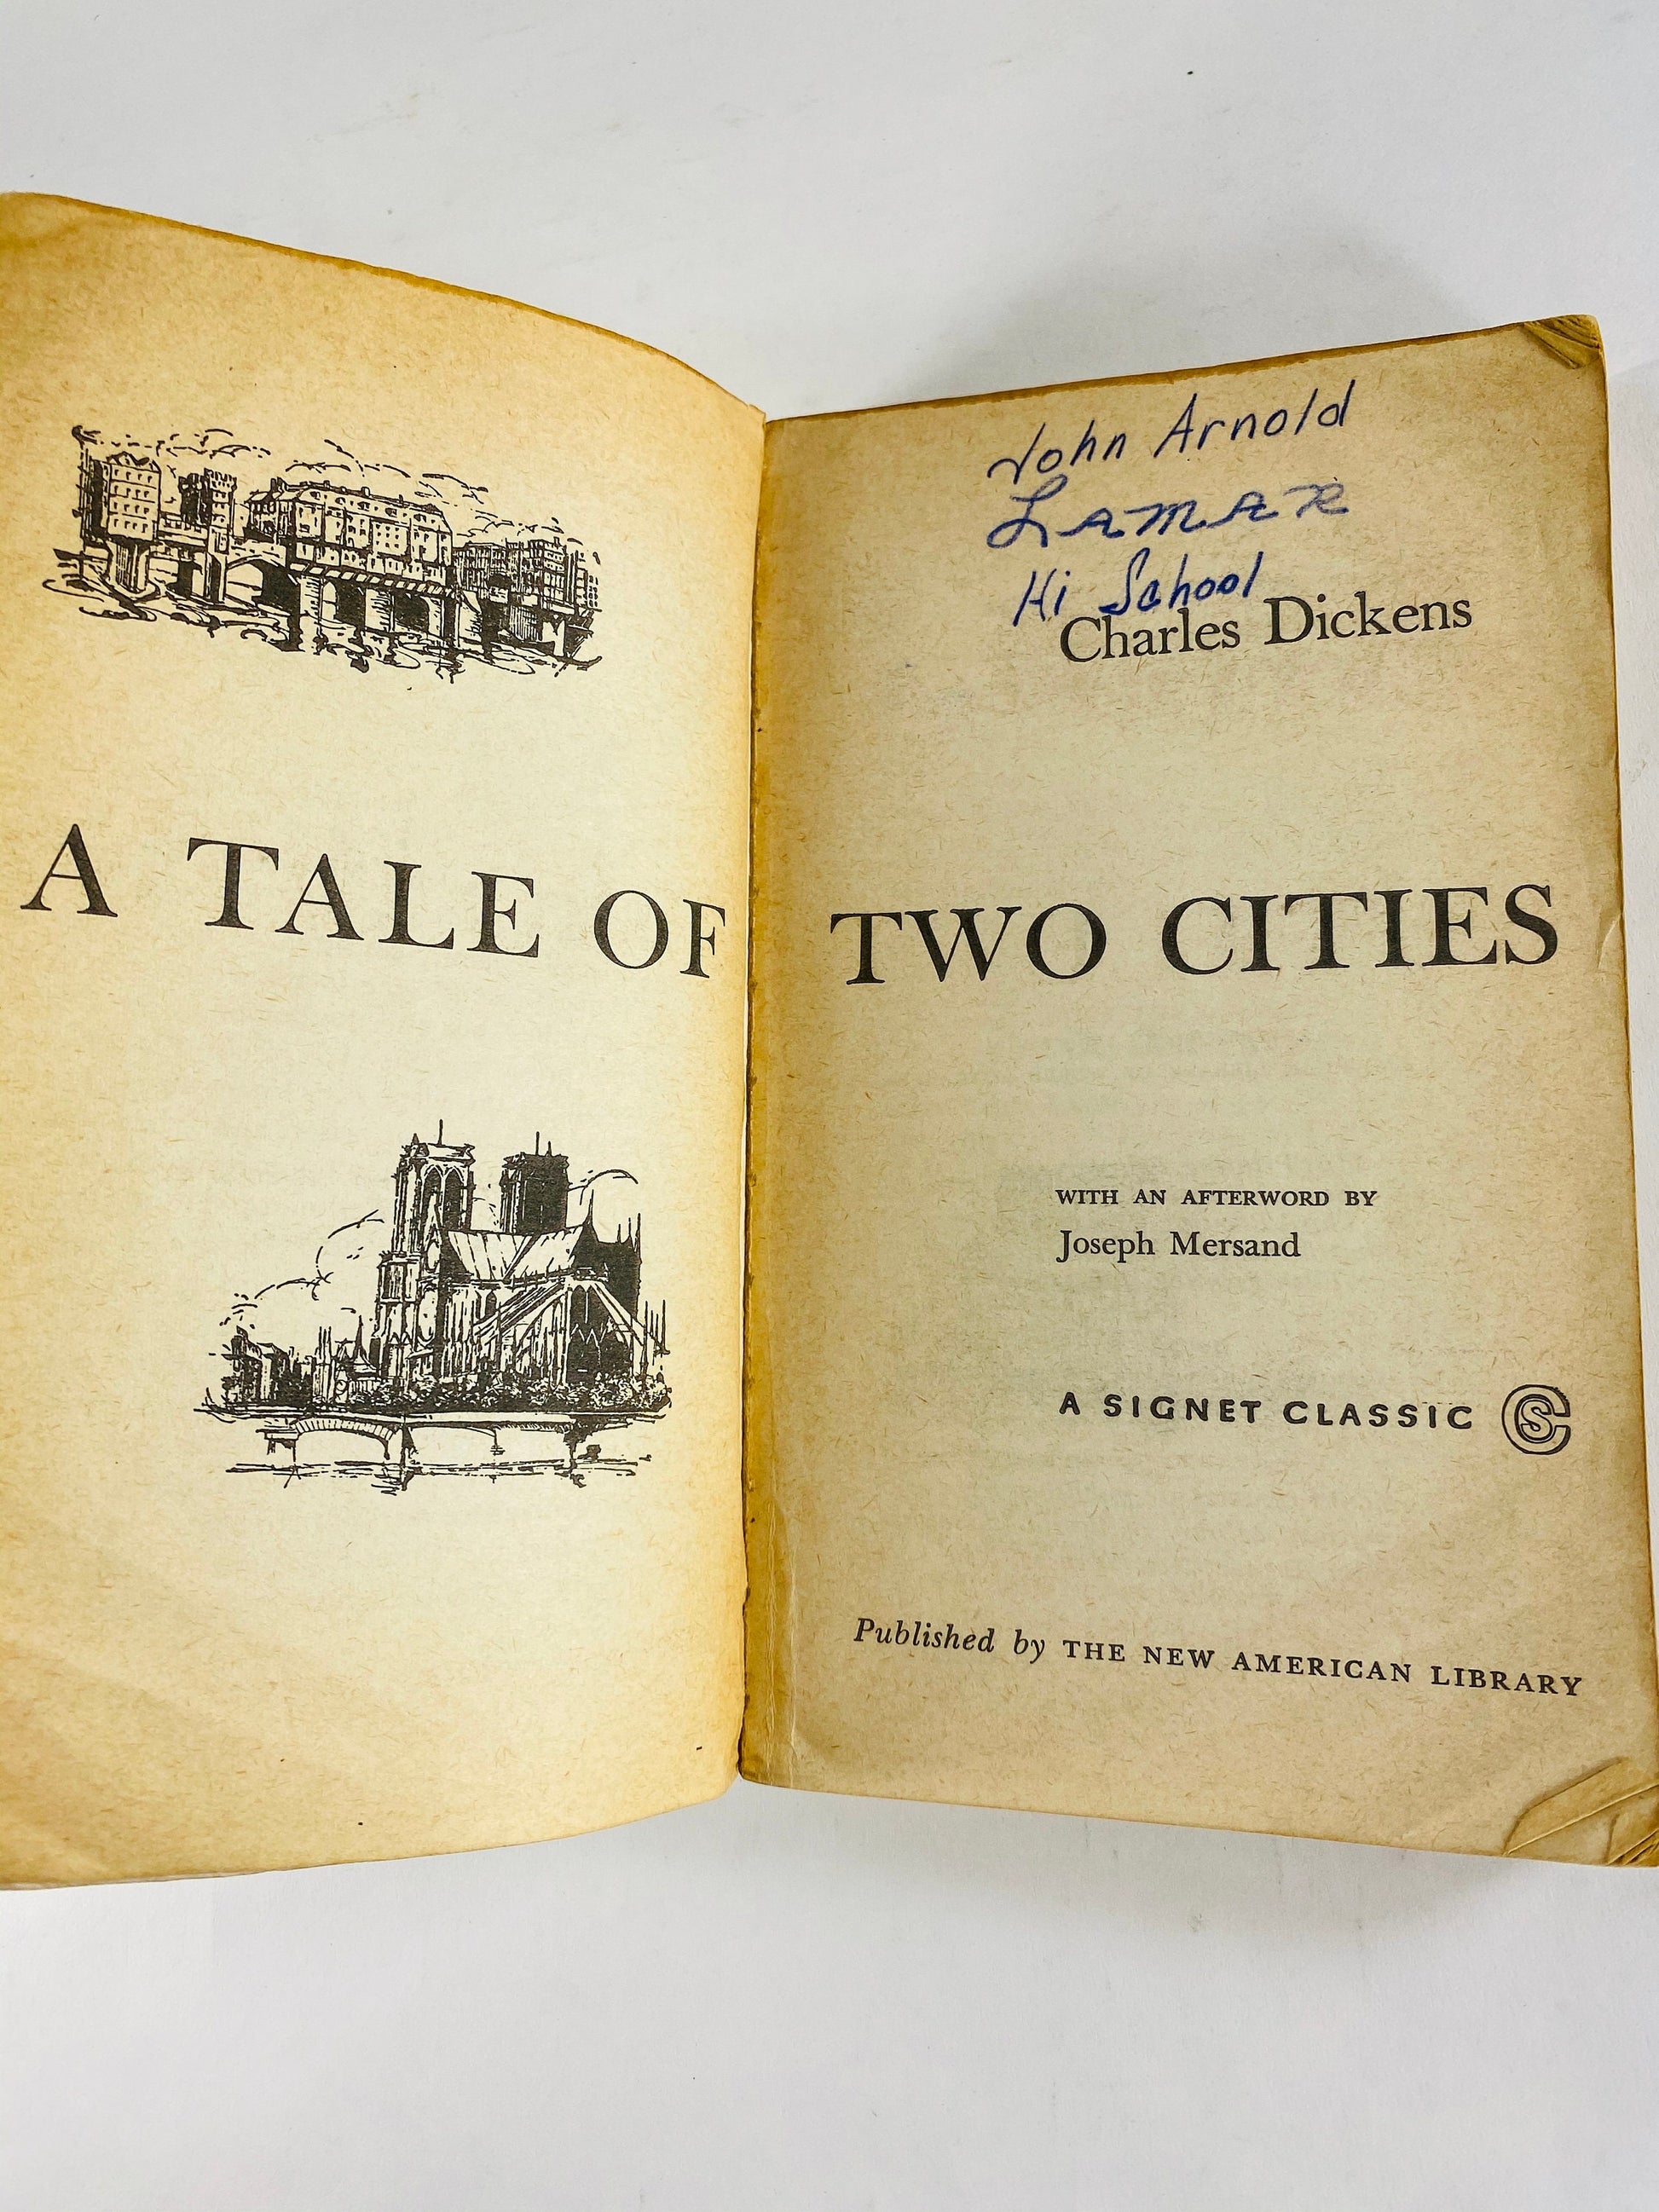 Charles Dickens Tale of Two Cities Vintage Signet paperback book circa 1962. White home decor prop staging. French Revolution.